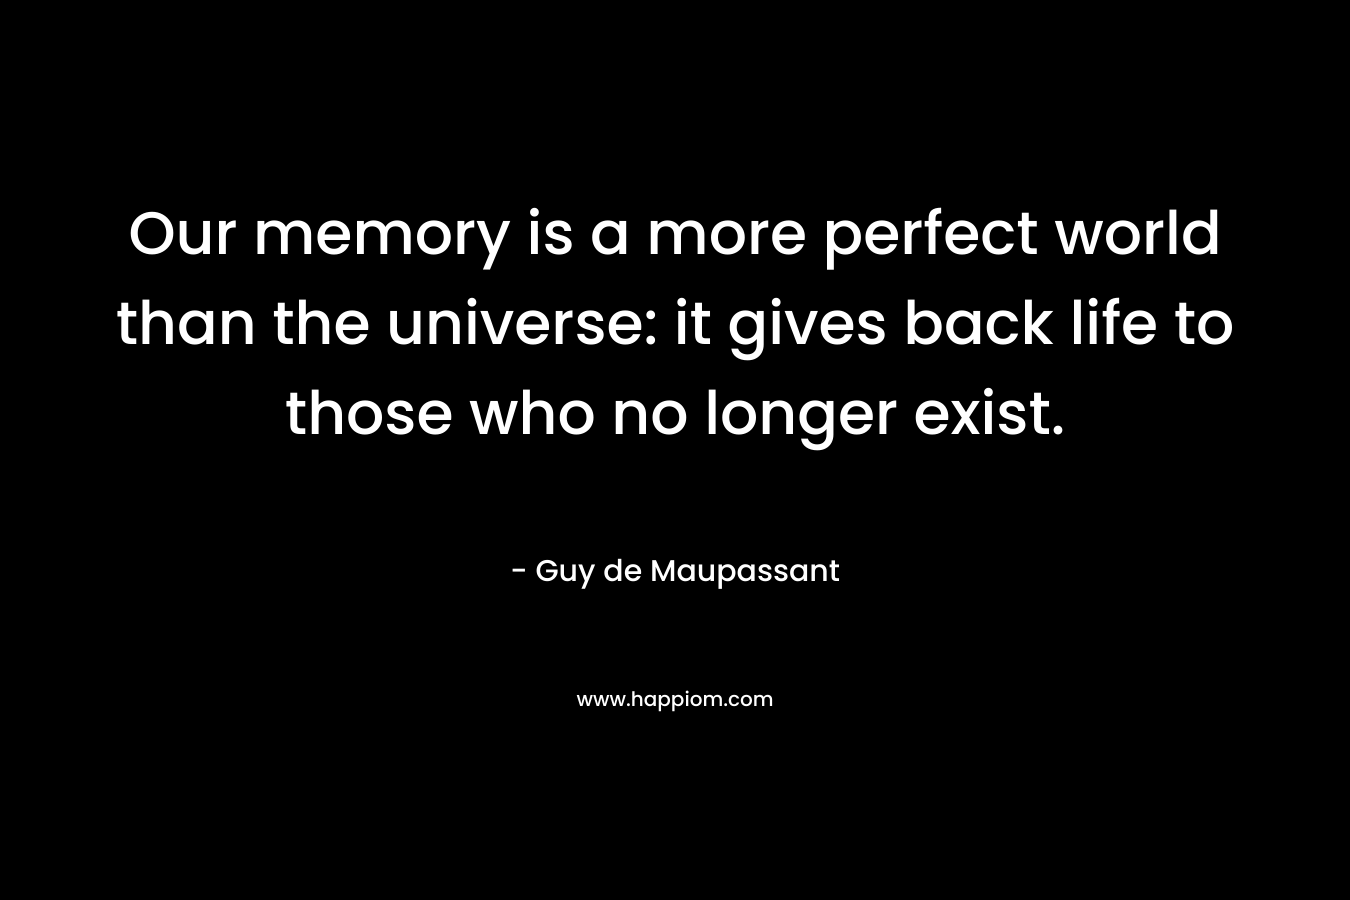 Our memory is a more perfect world than the universe: it gives back life to those who no longer exist.